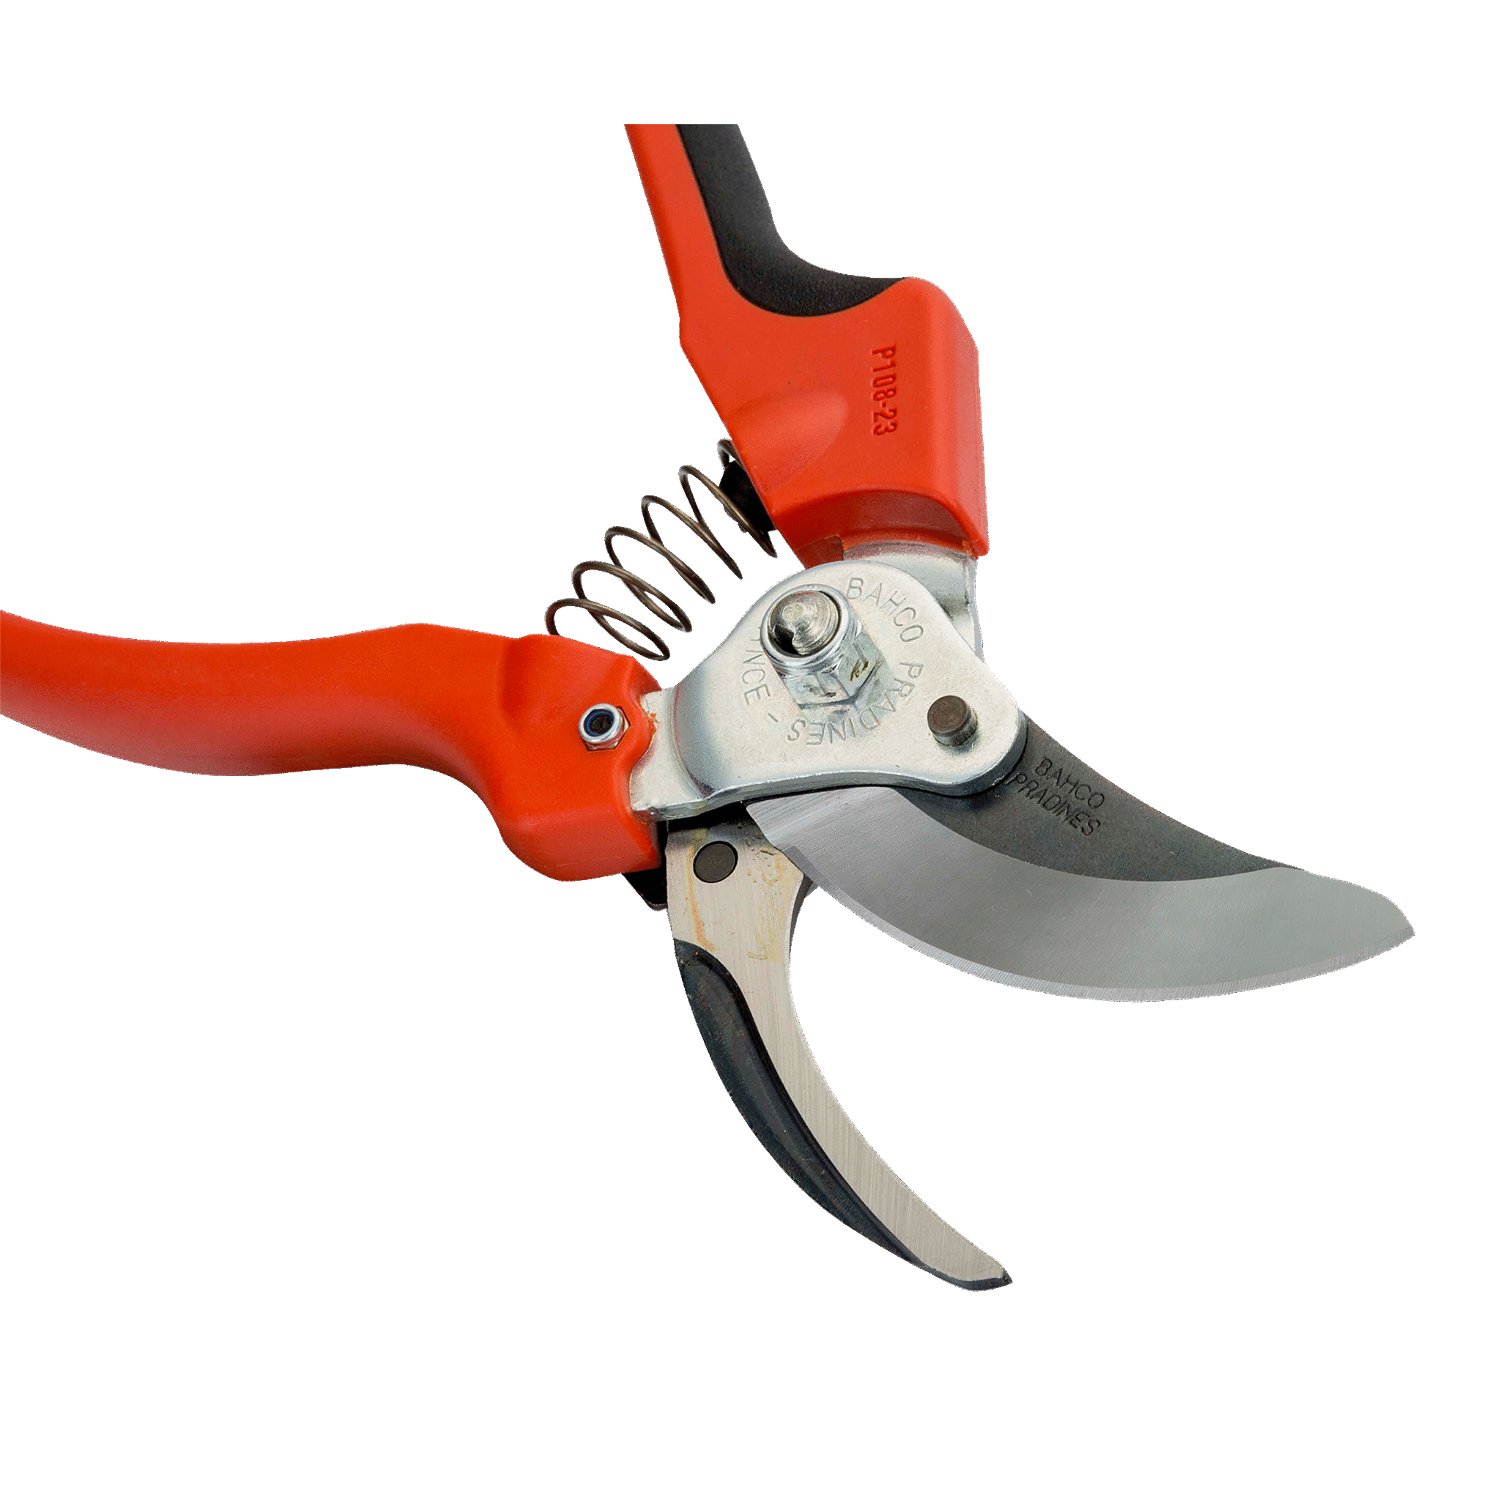 BAHCO P108 Bypass Secateurs with Soft Grip Composite Handle - Premium Secateurs from BAHCO - Shop now at Yew Aik.